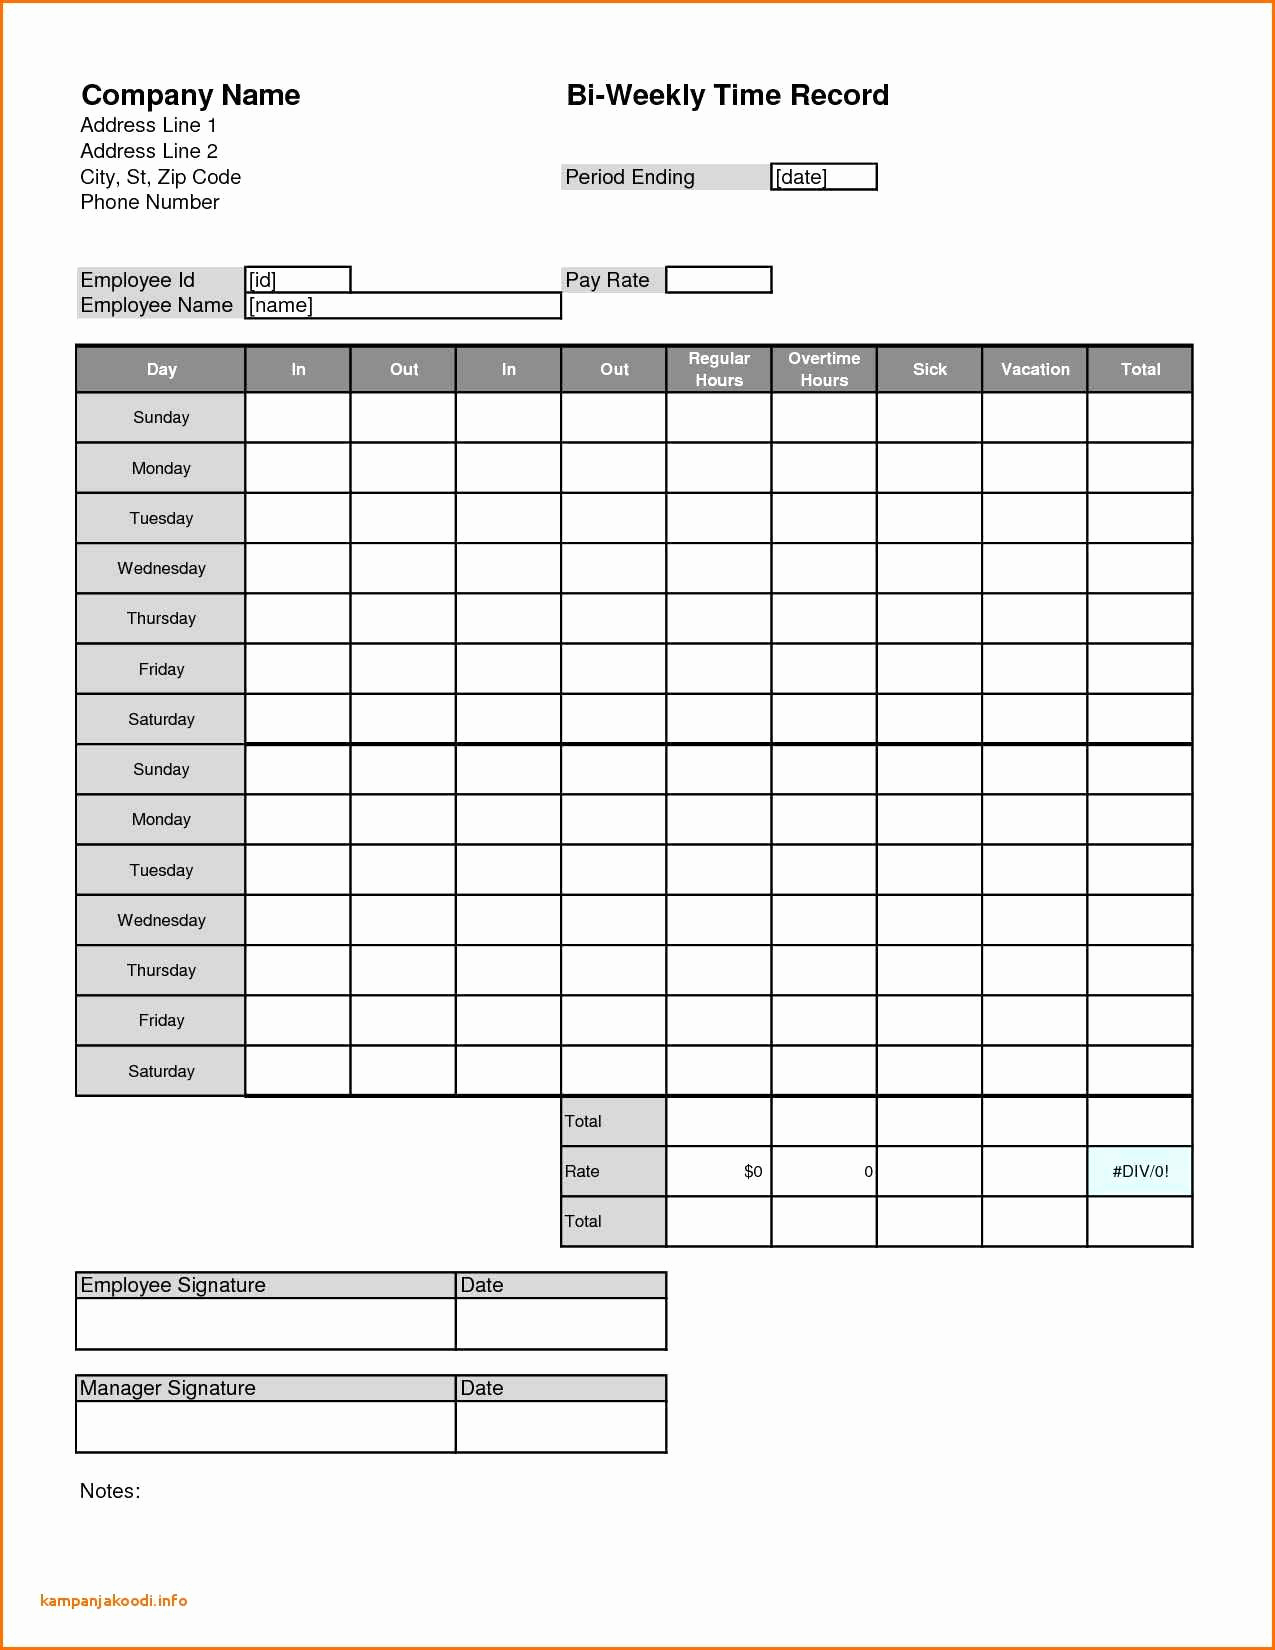 Time Card Spreadsheet With Regard To Bi Monthly Timesheet Template Excel Best Of Time Clock Spreadsheet